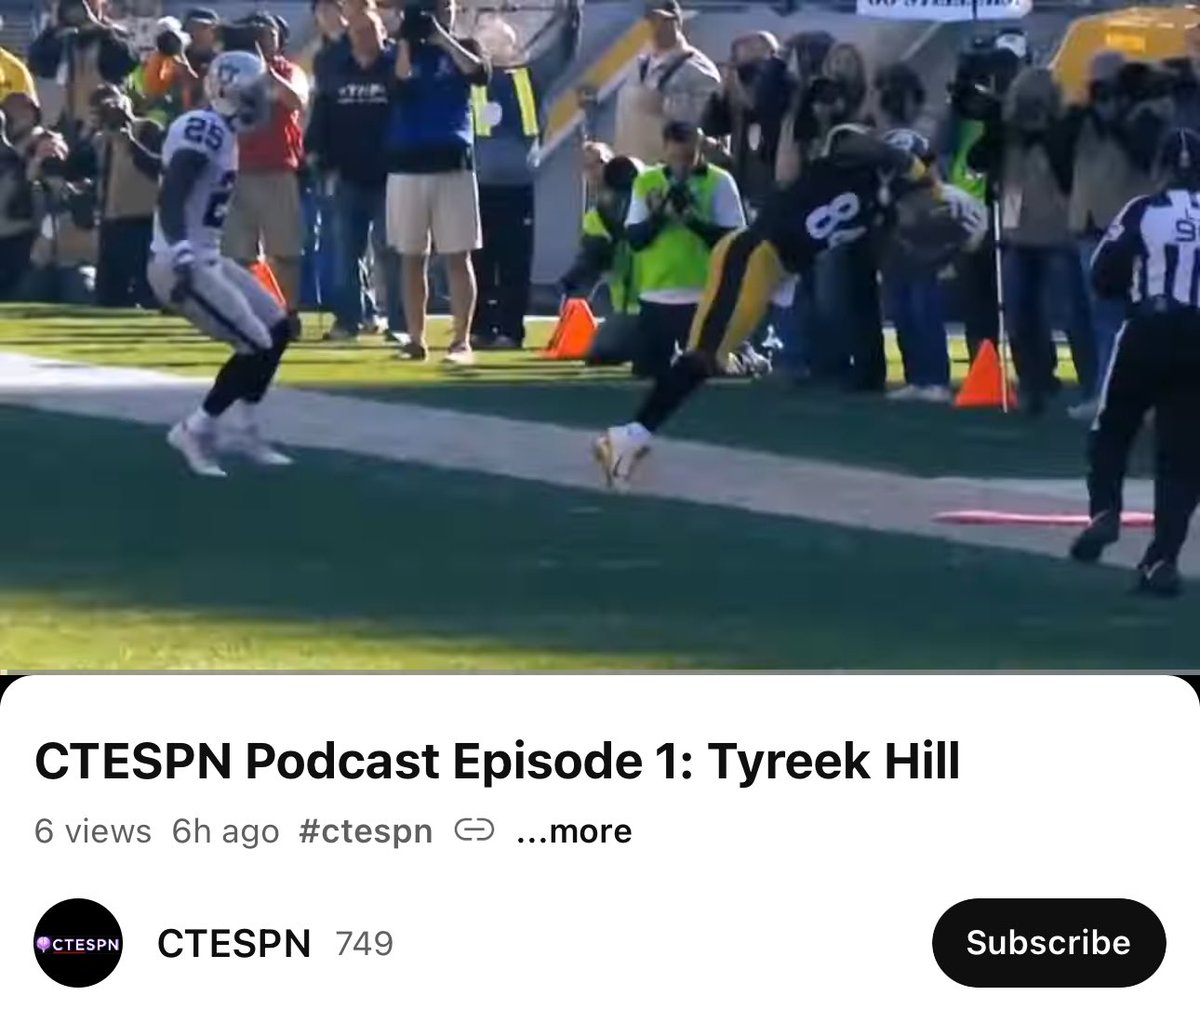 When should I release the full #CTESPN podcast? It’s ready to go 🍿@cheetah youtube.com/@CTESPNYT?si=Y…